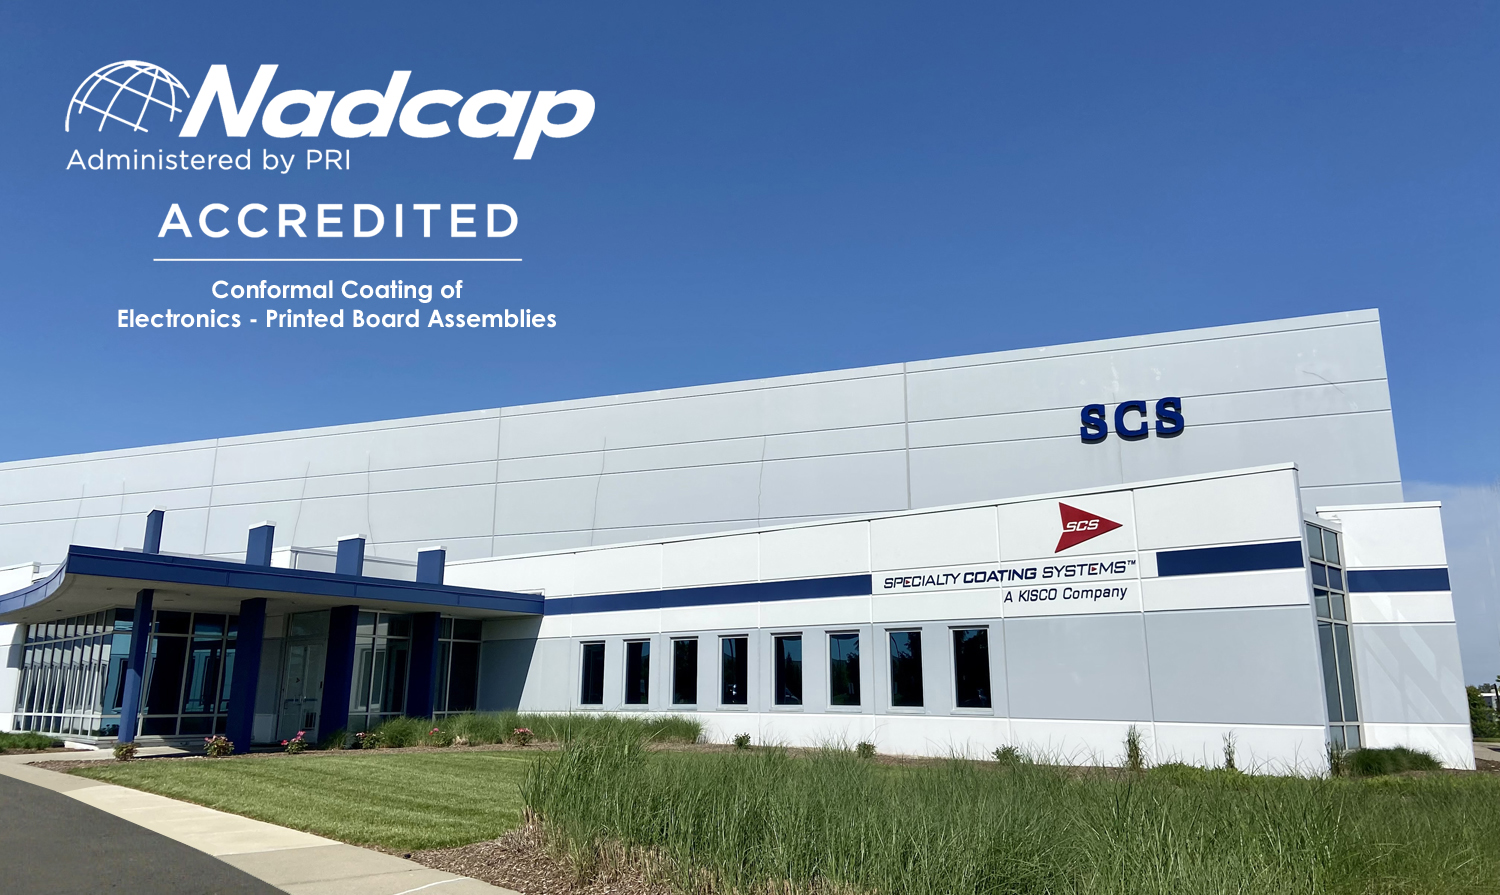 SCS Achieves Nadcap® Accreditation for Conformal Coating of Electronics - Printed Board Assemblies